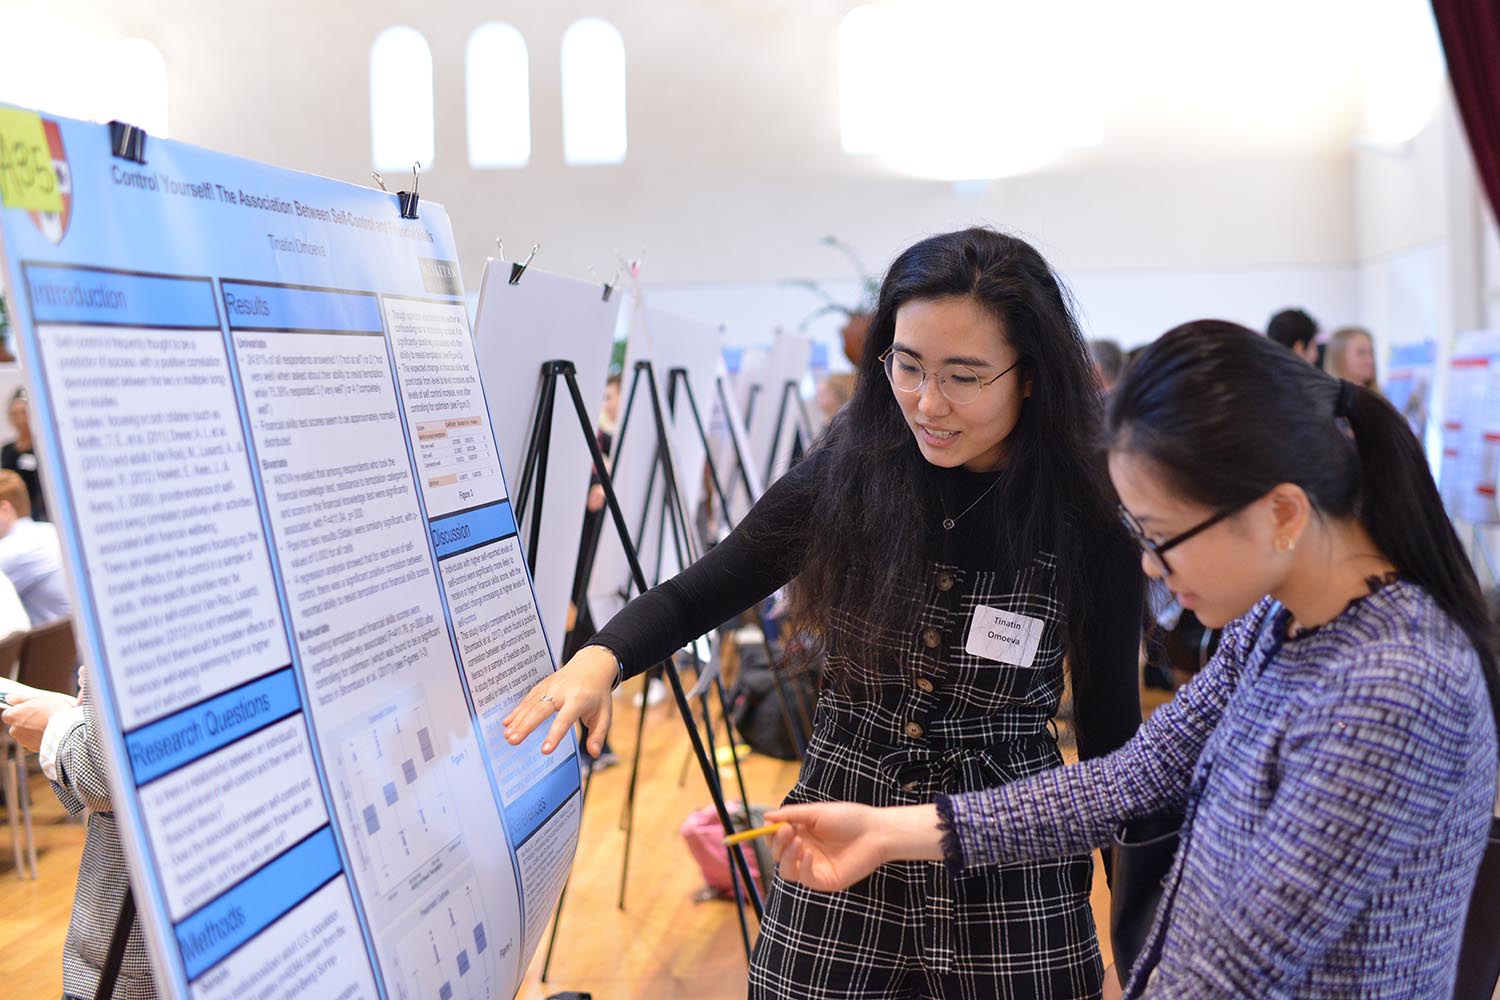 Tinatin Omoeva '21 discussed her poster called, "Control Yourself! The Association Between Self-Control and Financial Skills."